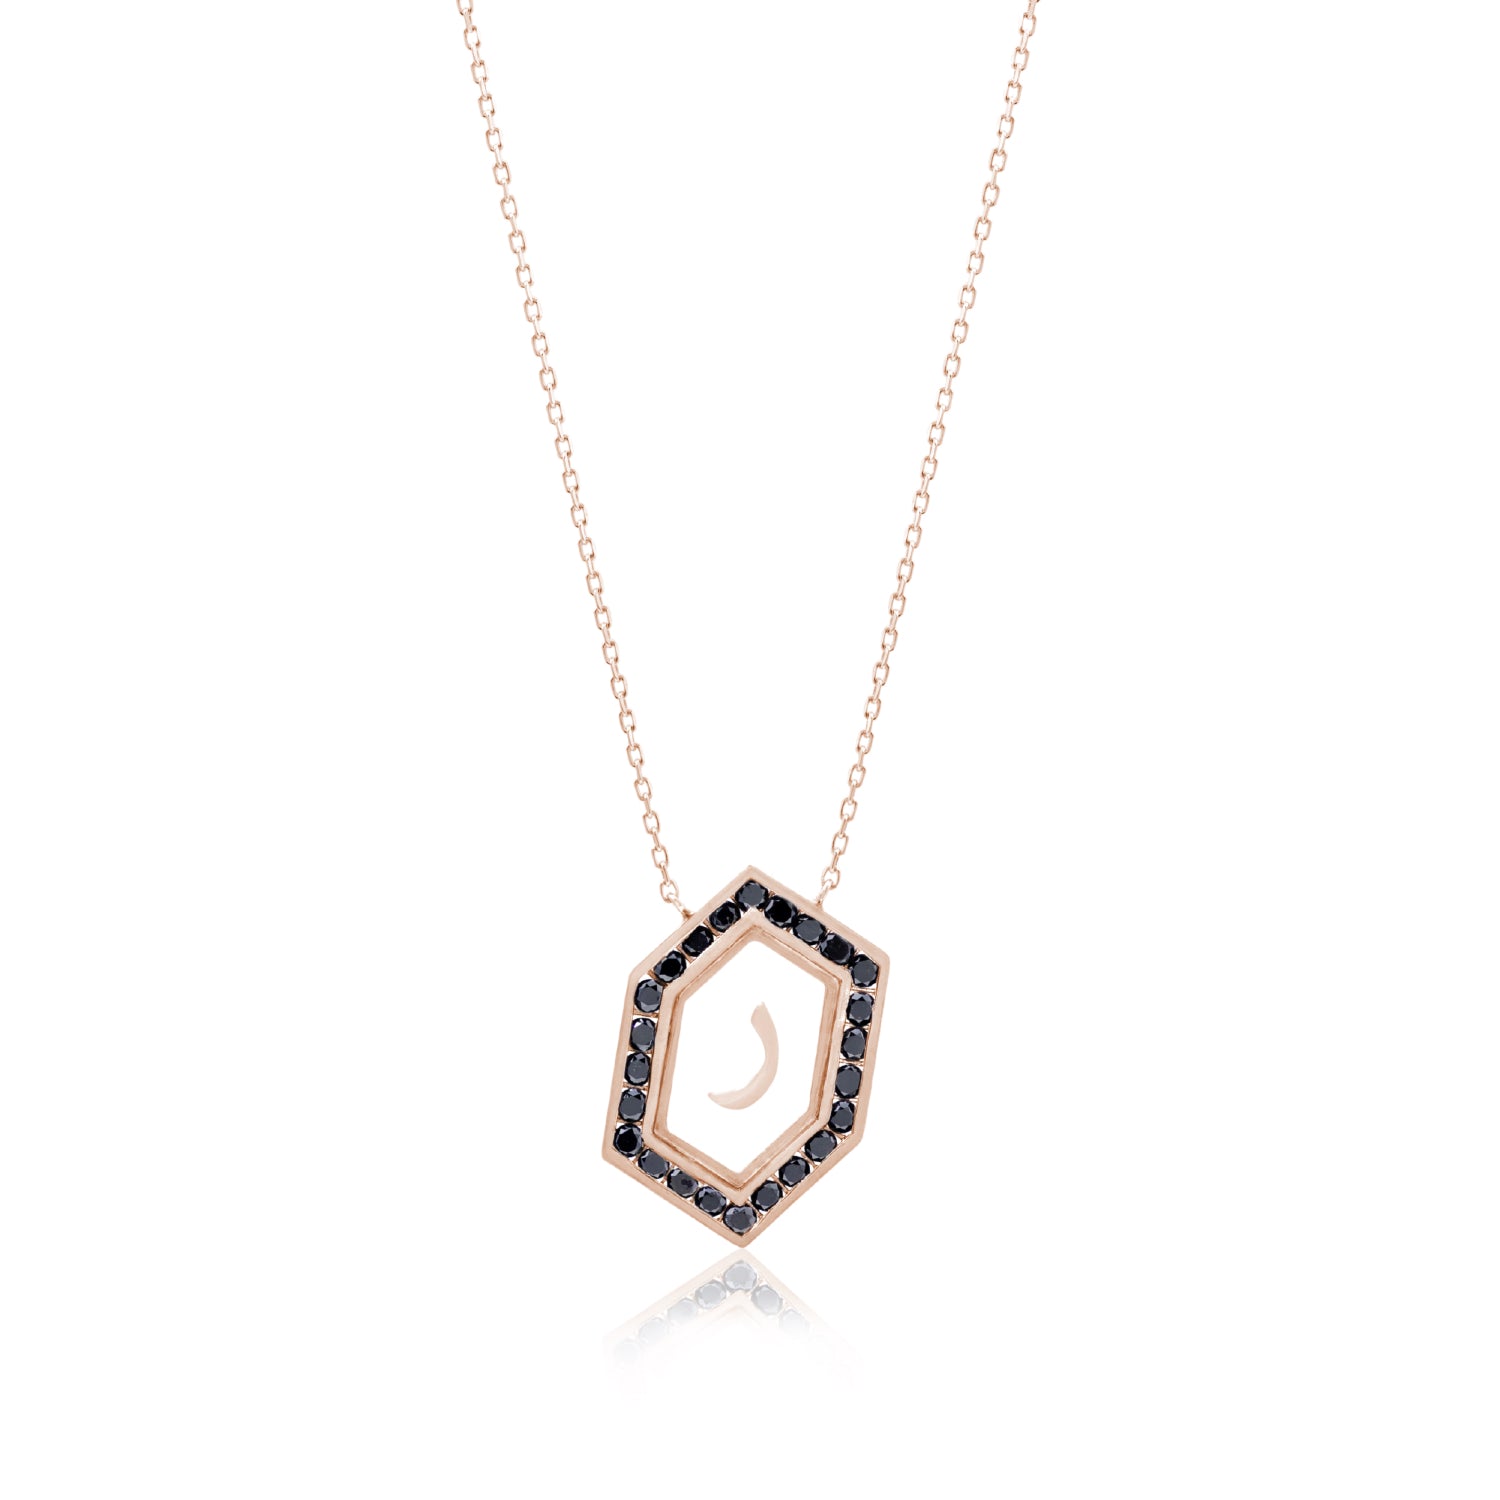 Qamoos 1.0 Letter ر Black Diamond Necklace in Rose Gold